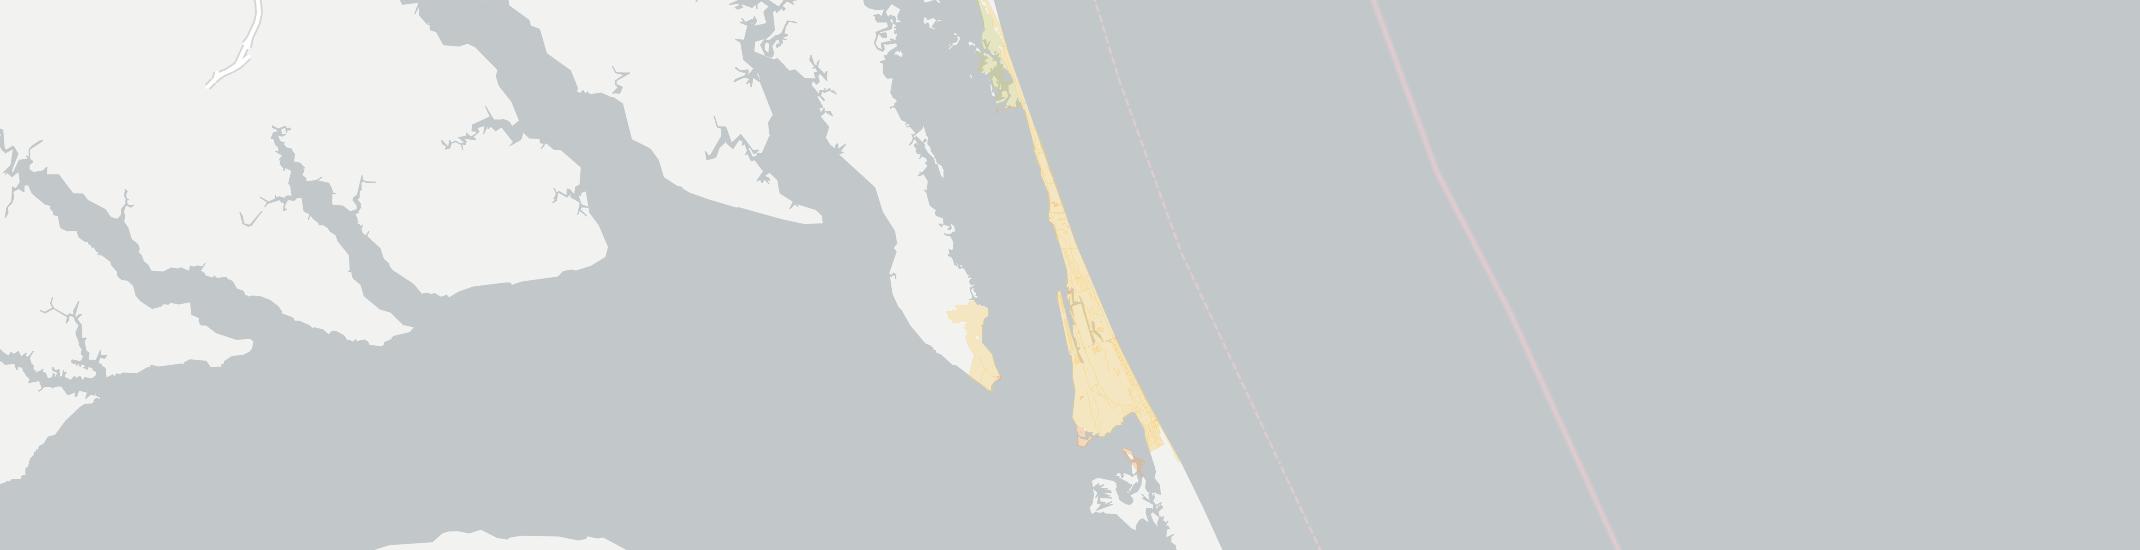 Kitty Hawk Internet Competition Map. Click for interactive map